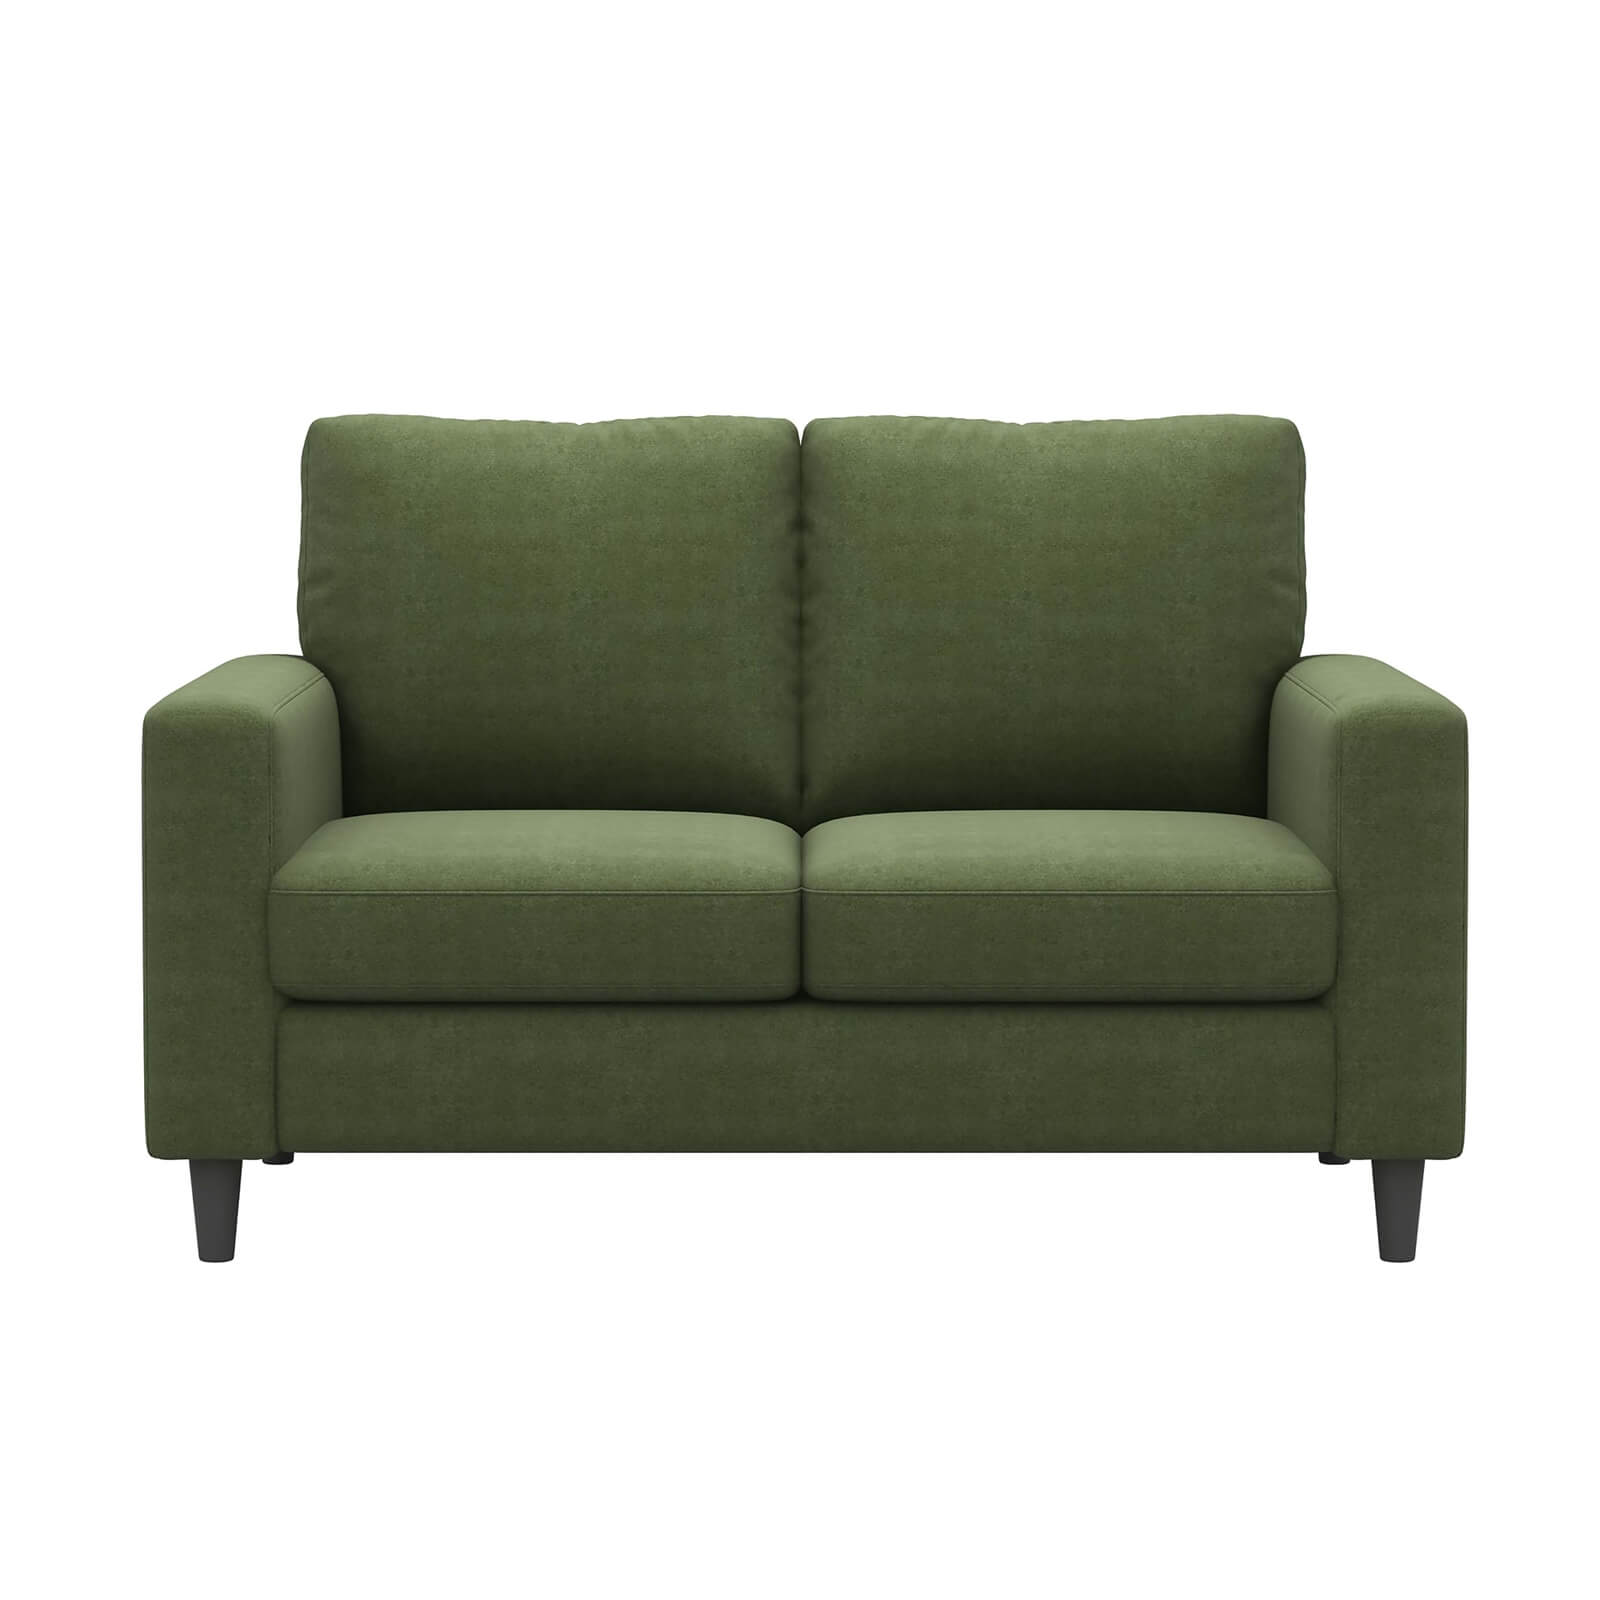 Harrison 2 Seater Sofa - Forest